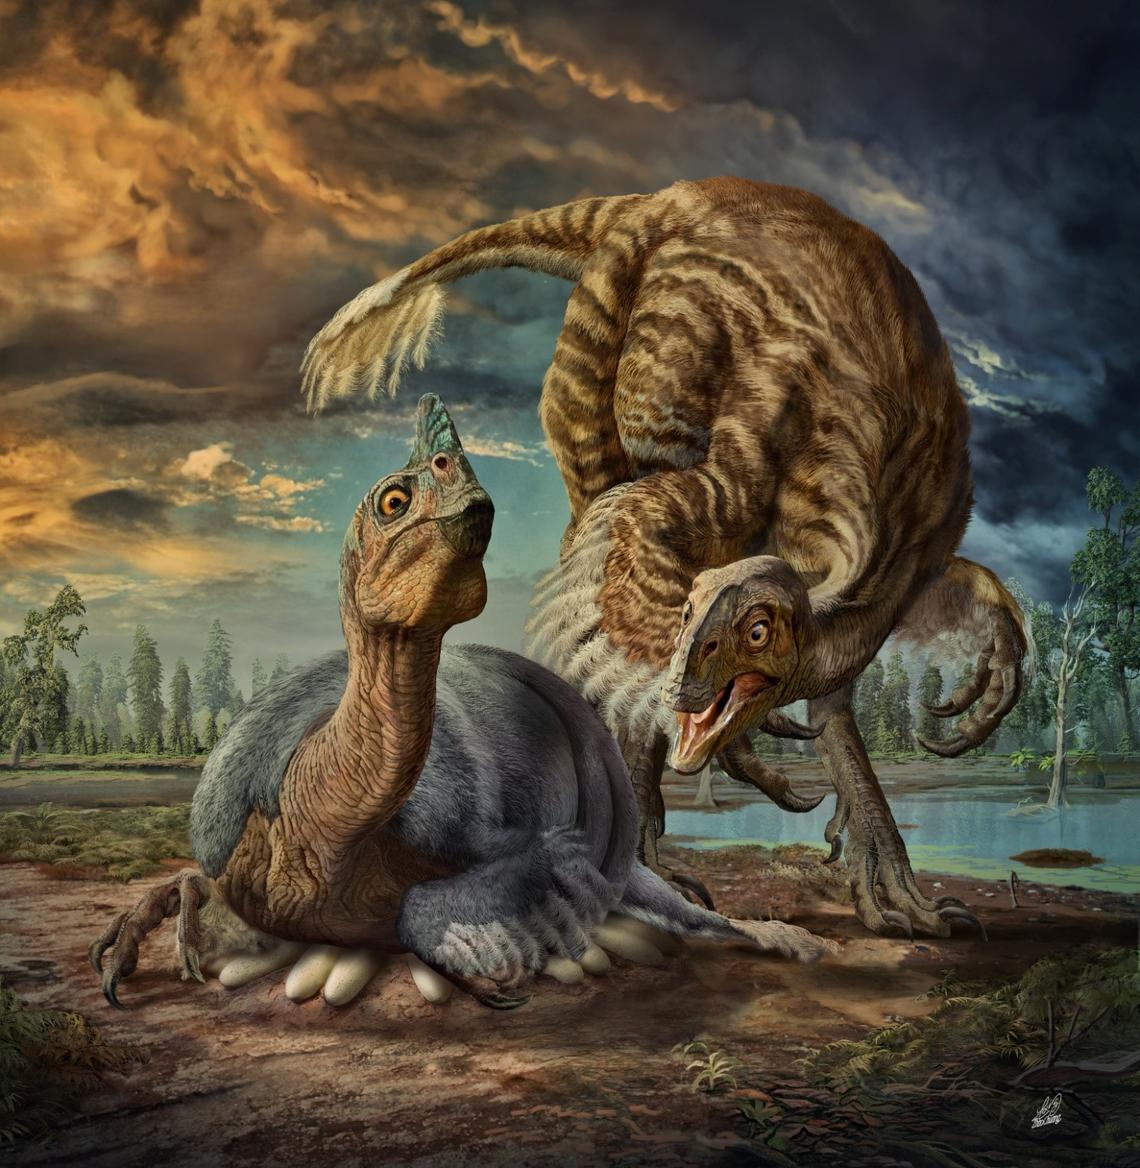 A nesting gigantic cassowary-like dinosaur named Beibeilong in the act of incubating its eggs.